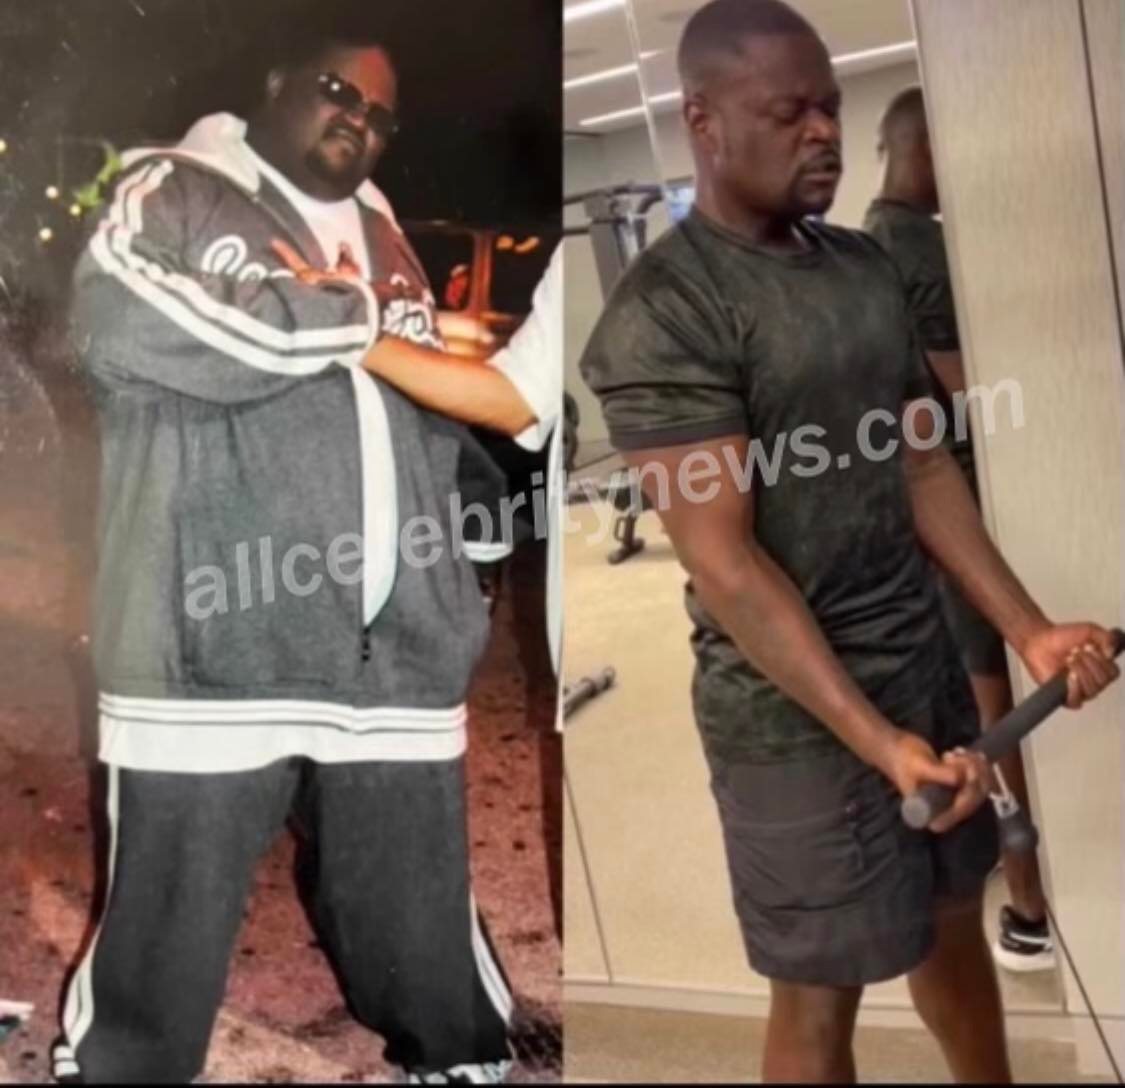 Poo Bear lost an incredible 240 pounds without lap band surgery or other weight loss surgery